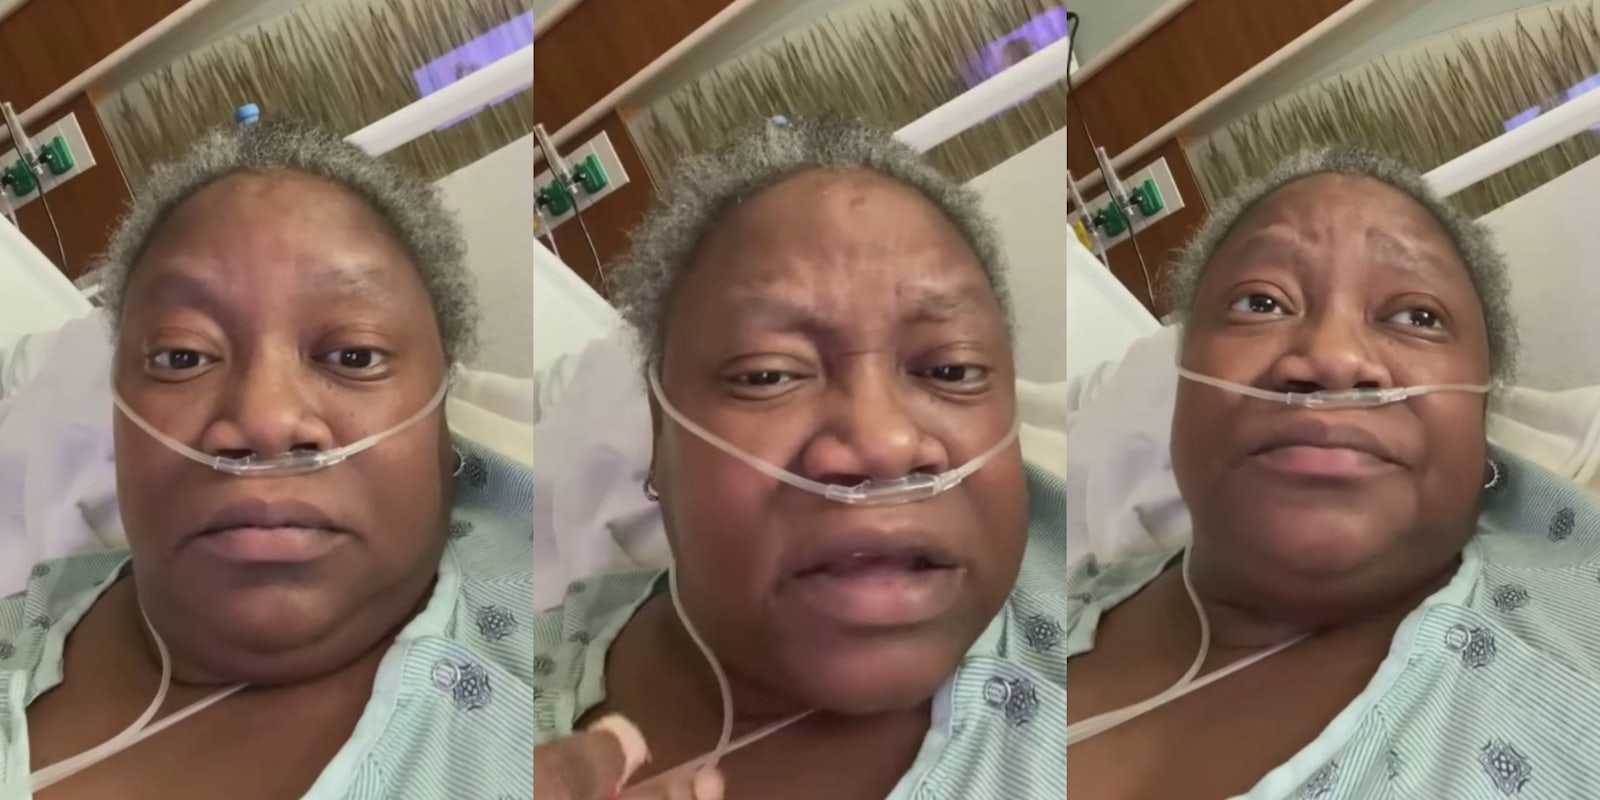 Black physician Susan Moore details mistreatment in Facebook video before dying of COVID-19